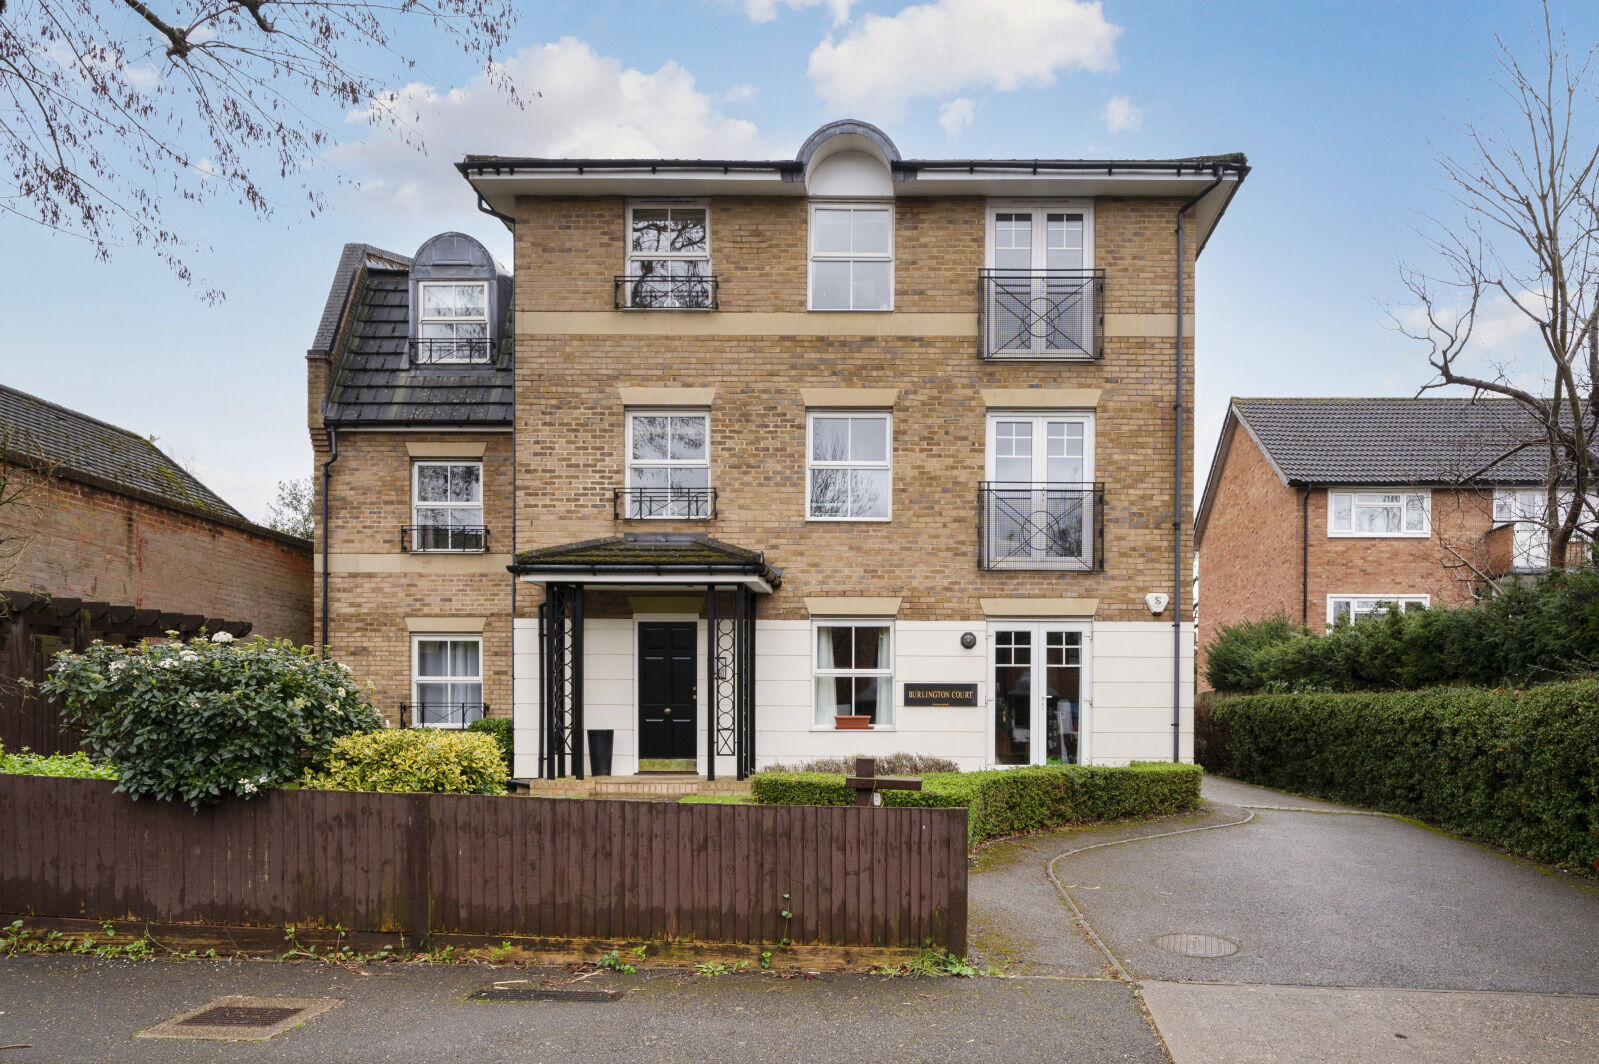 2 bedroom  flat to rent, Available now Lovelace Gardens, Surbiton, KT6, main image